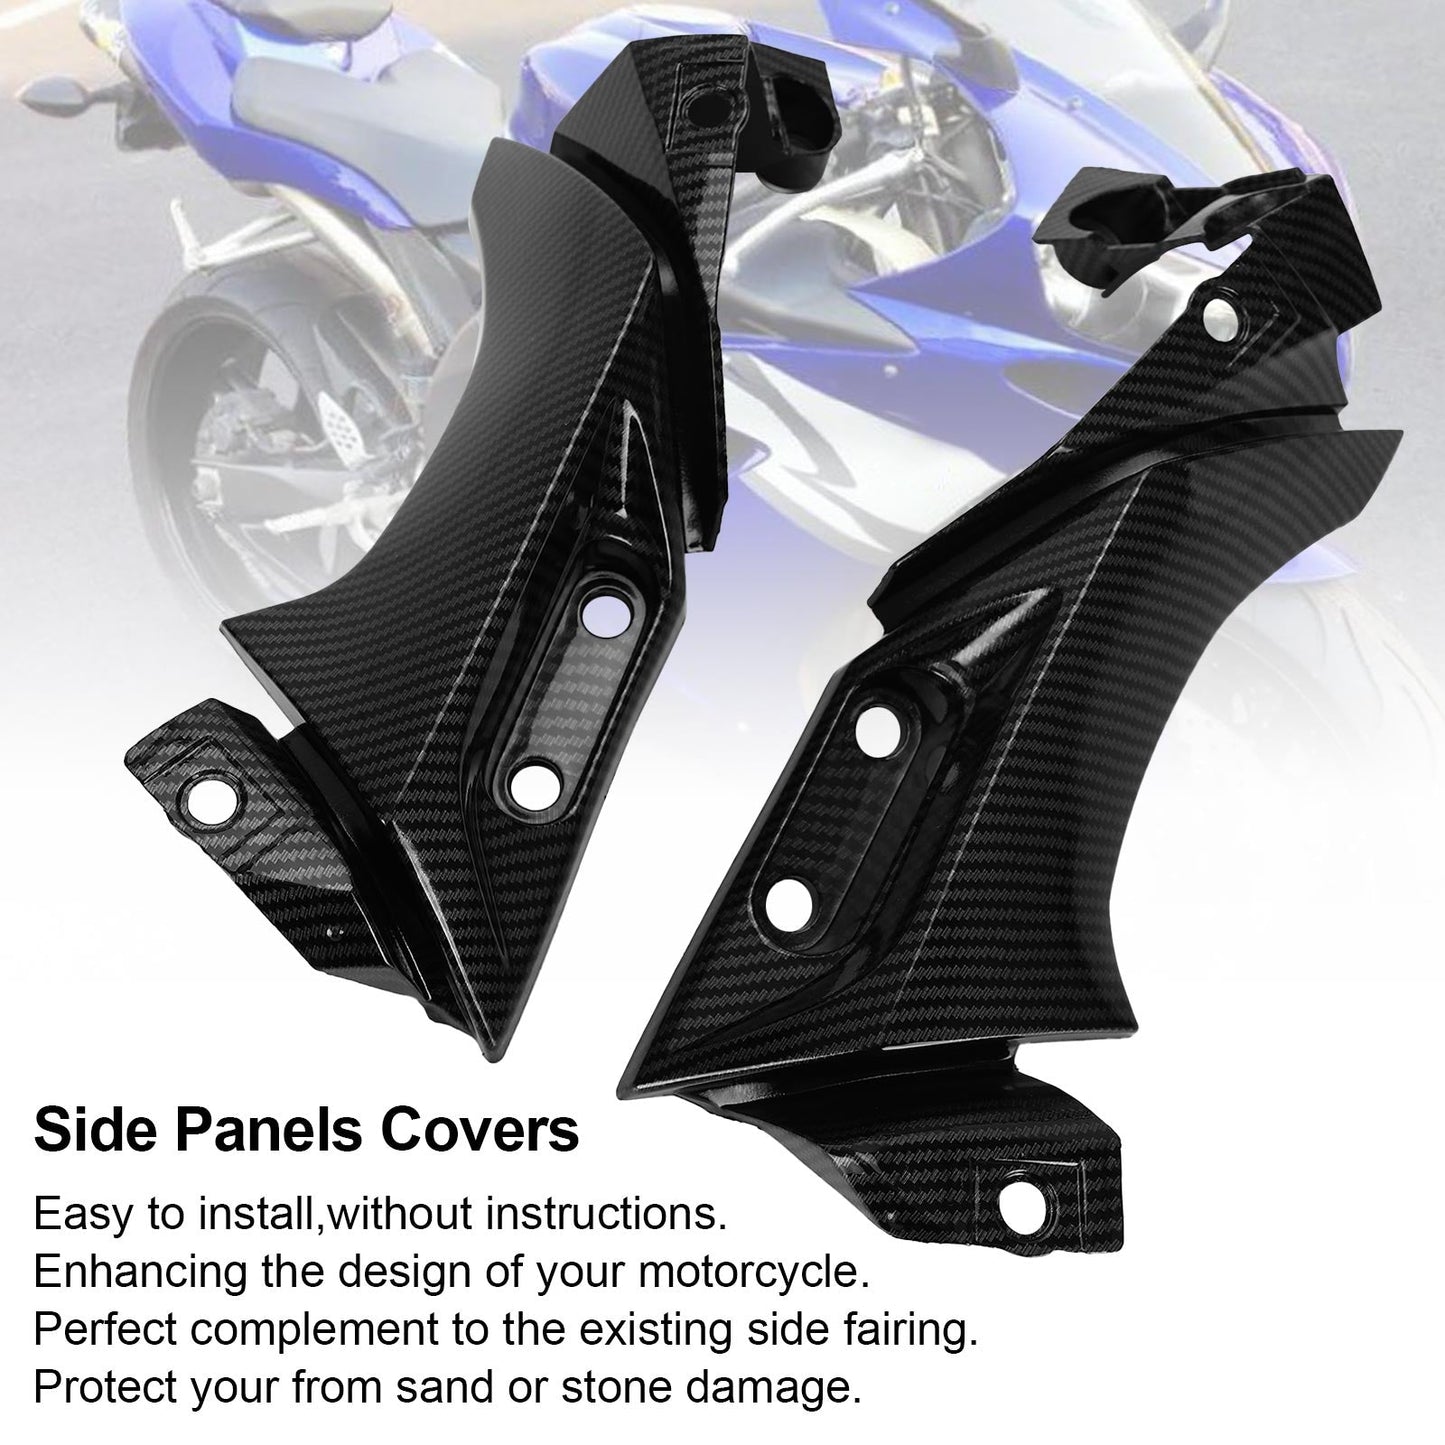 Side Frame Mid Cover Panel Fairing Cowl for Yamaha YZF R1 2004-2006 Carbon